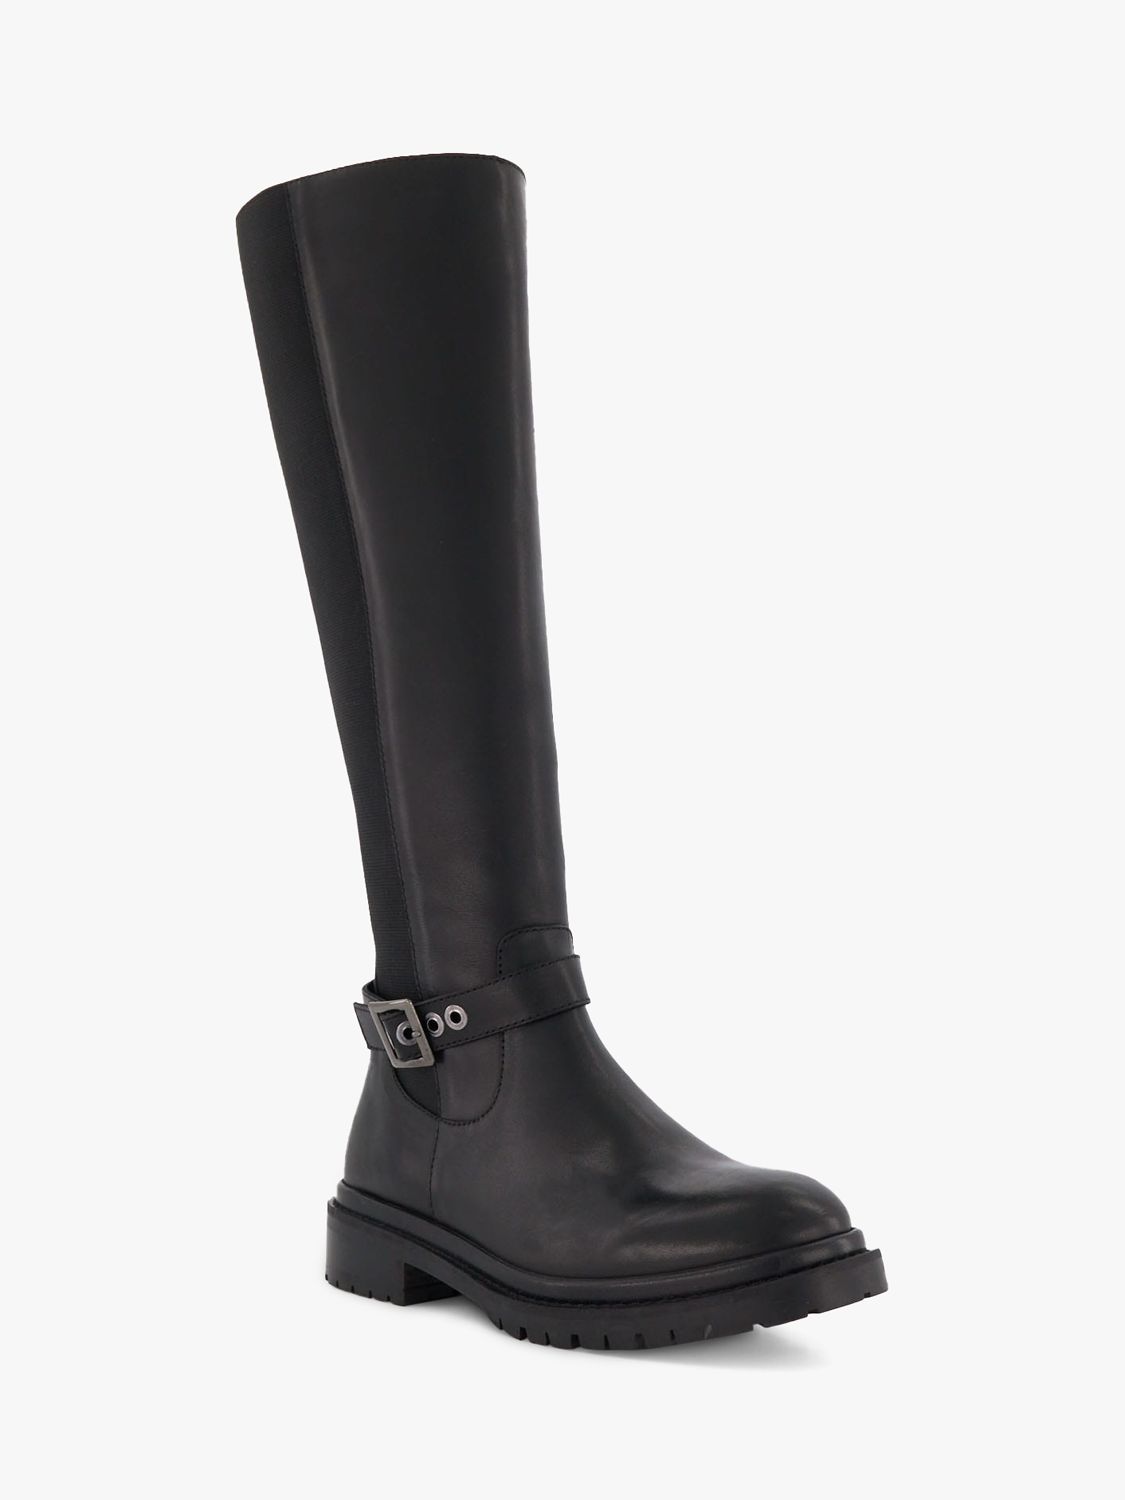 Dune Teller Leather Knee High Boots, Black-leather at John Lewis & Partners